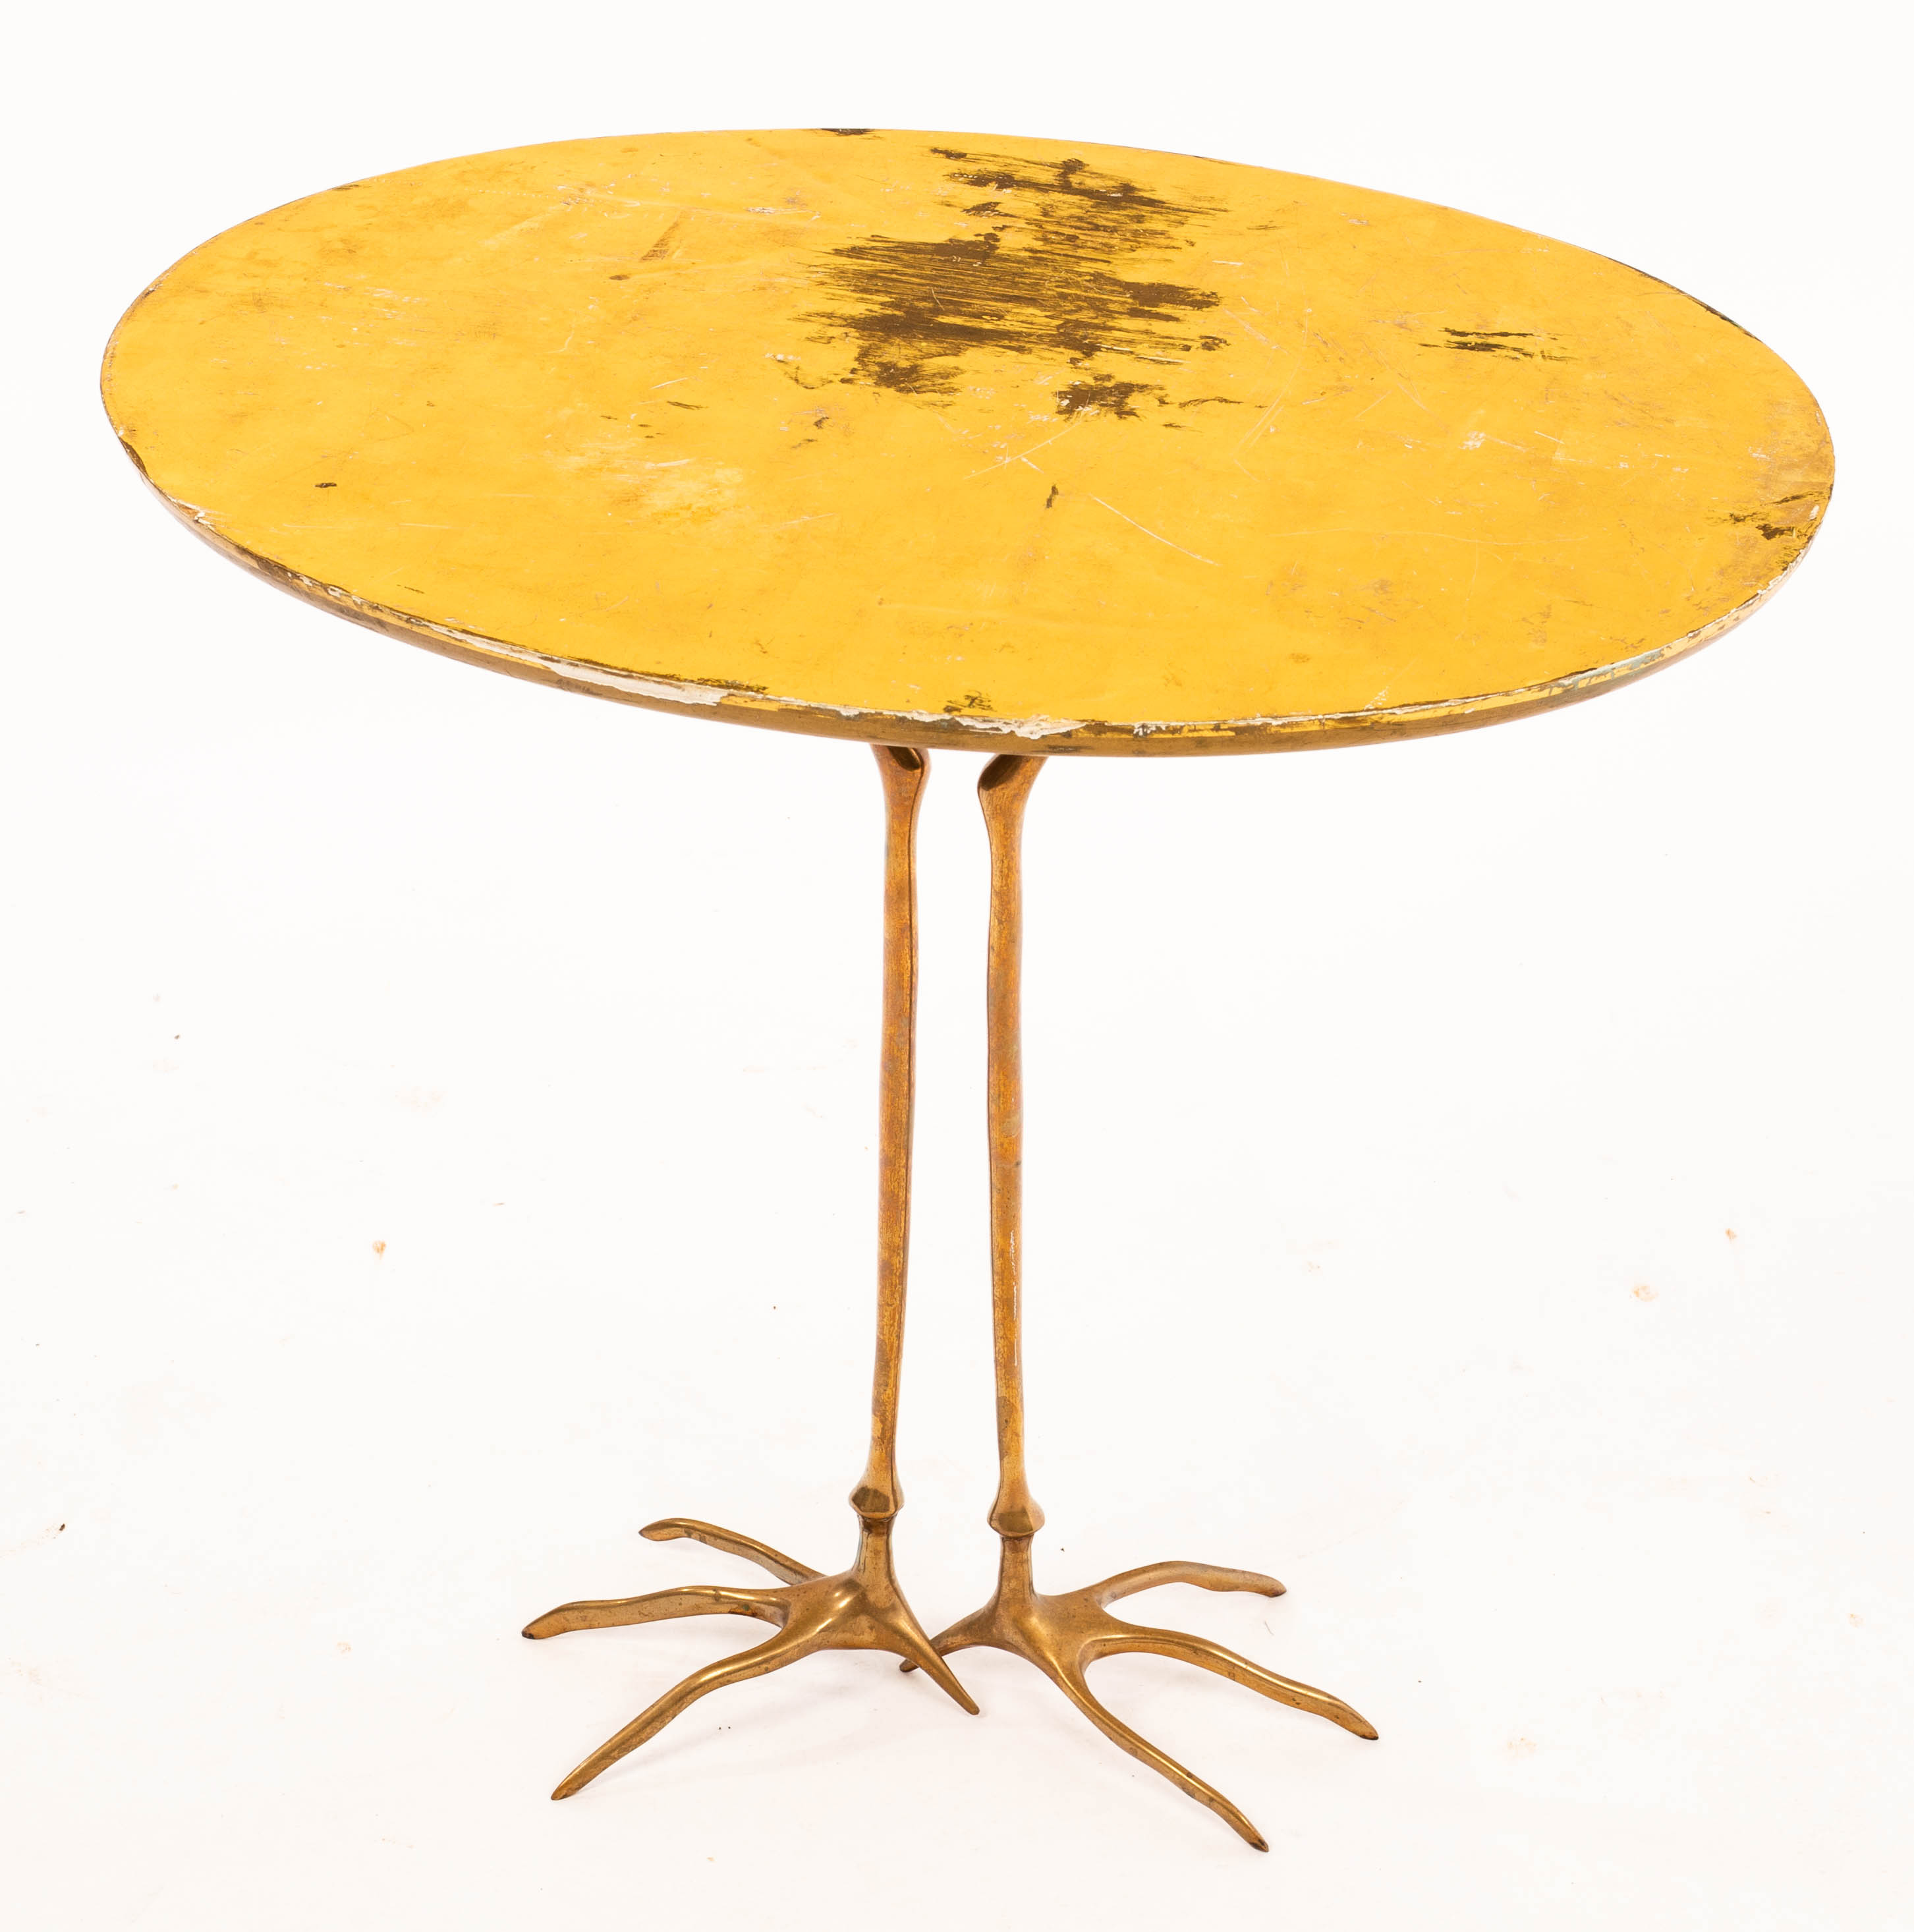 Meret Oppenheim (1913-1985), a Traccia table, designed 1936 and produced since 1976,